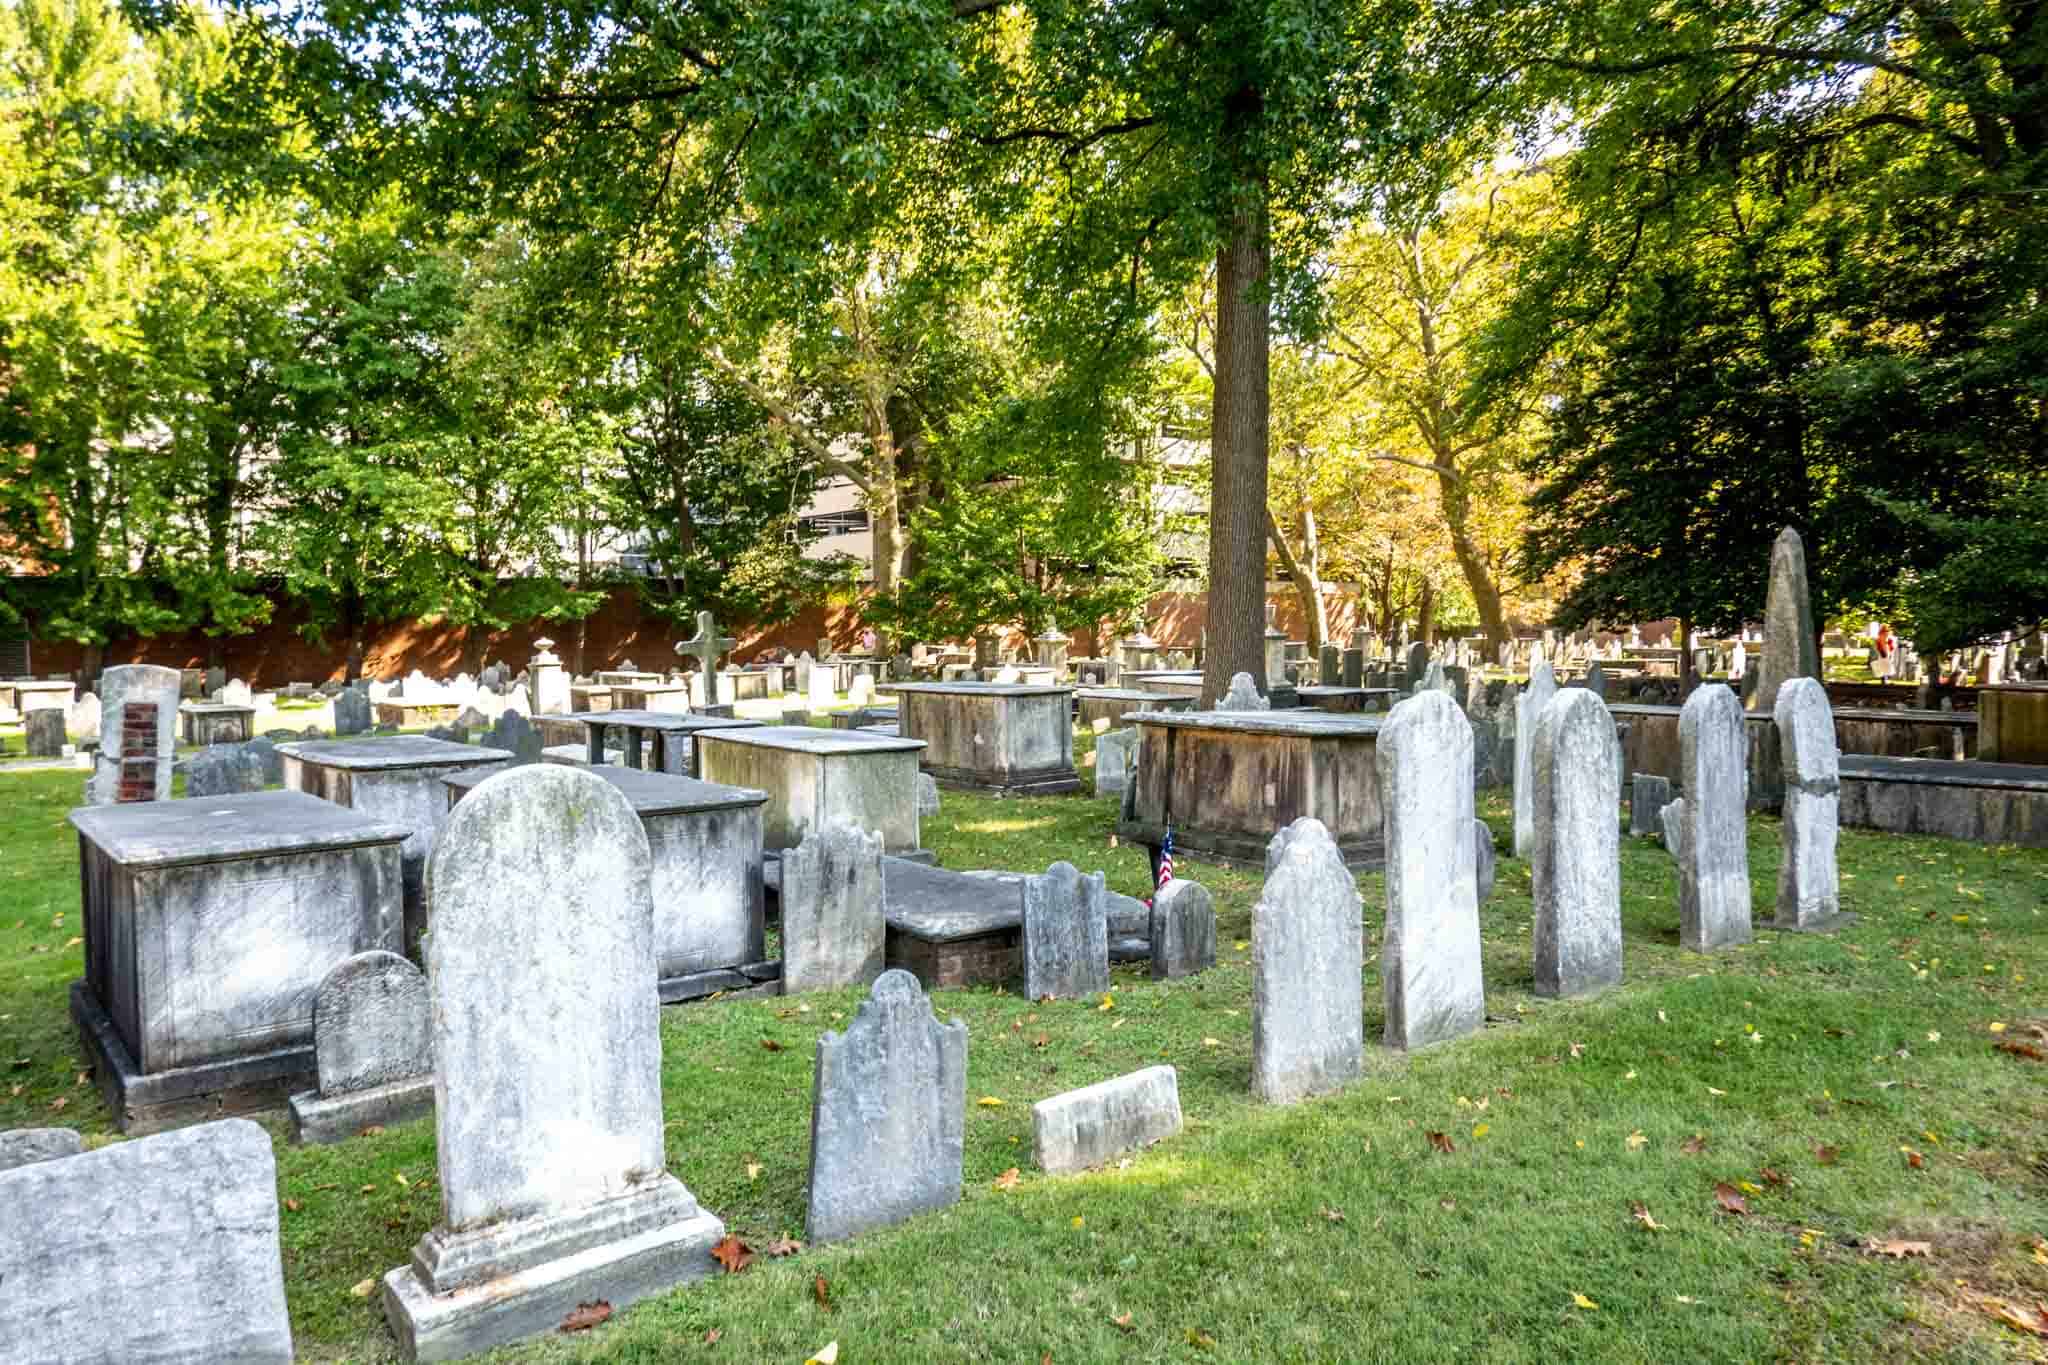 Rows of old tombstones in Christ Church burial ground surrounded by trees.